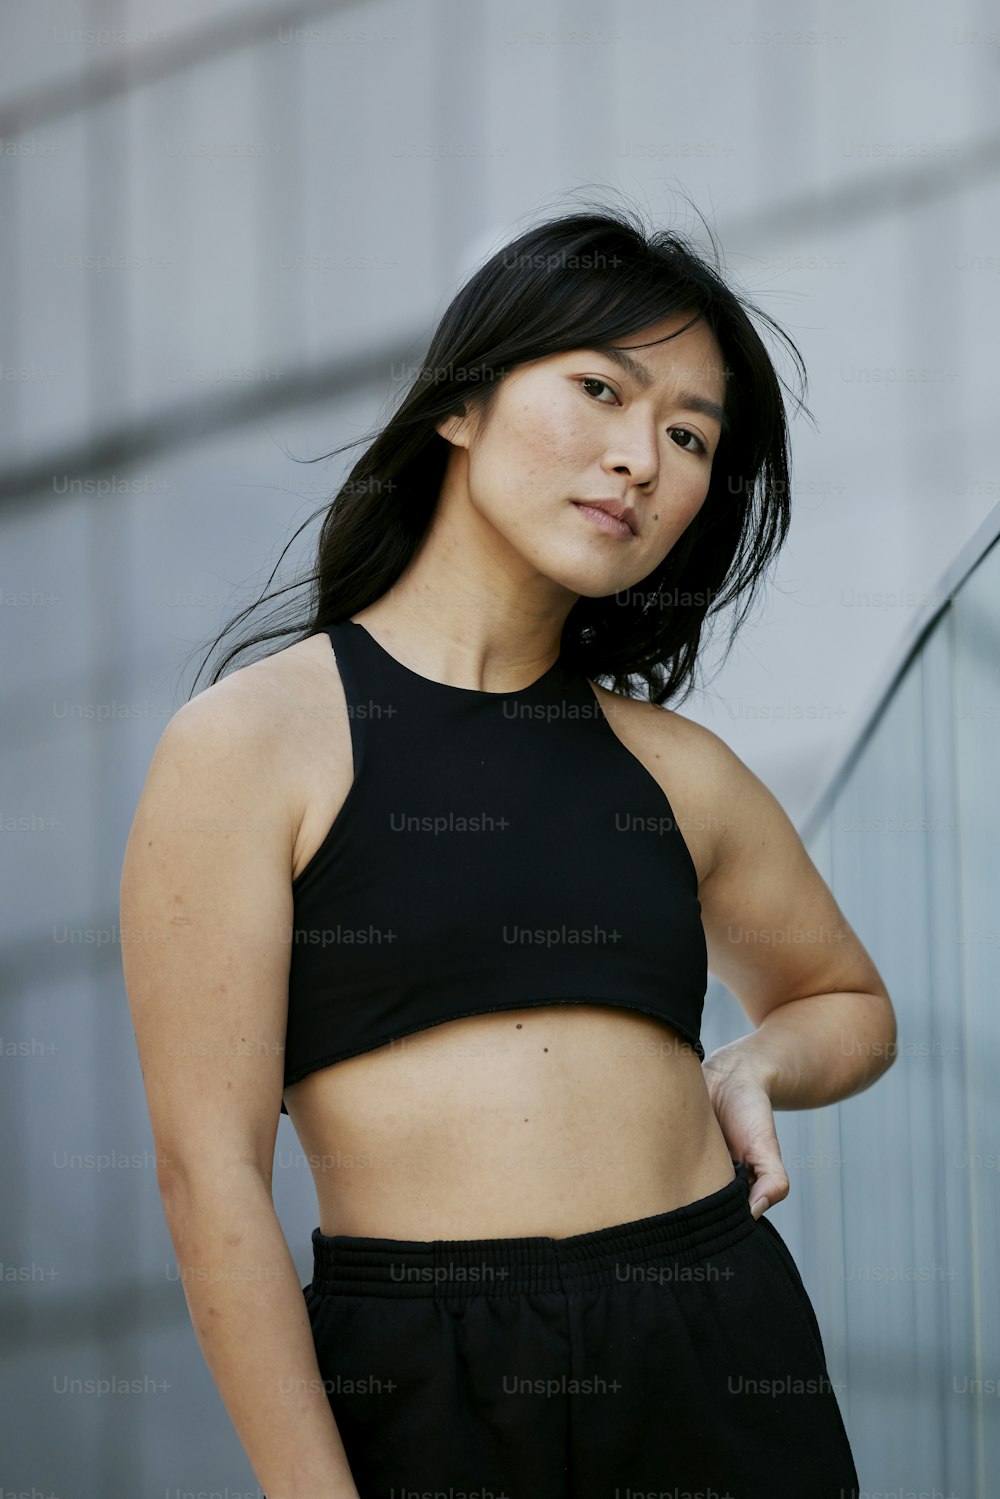 a woman in a black crop top posing for a picture